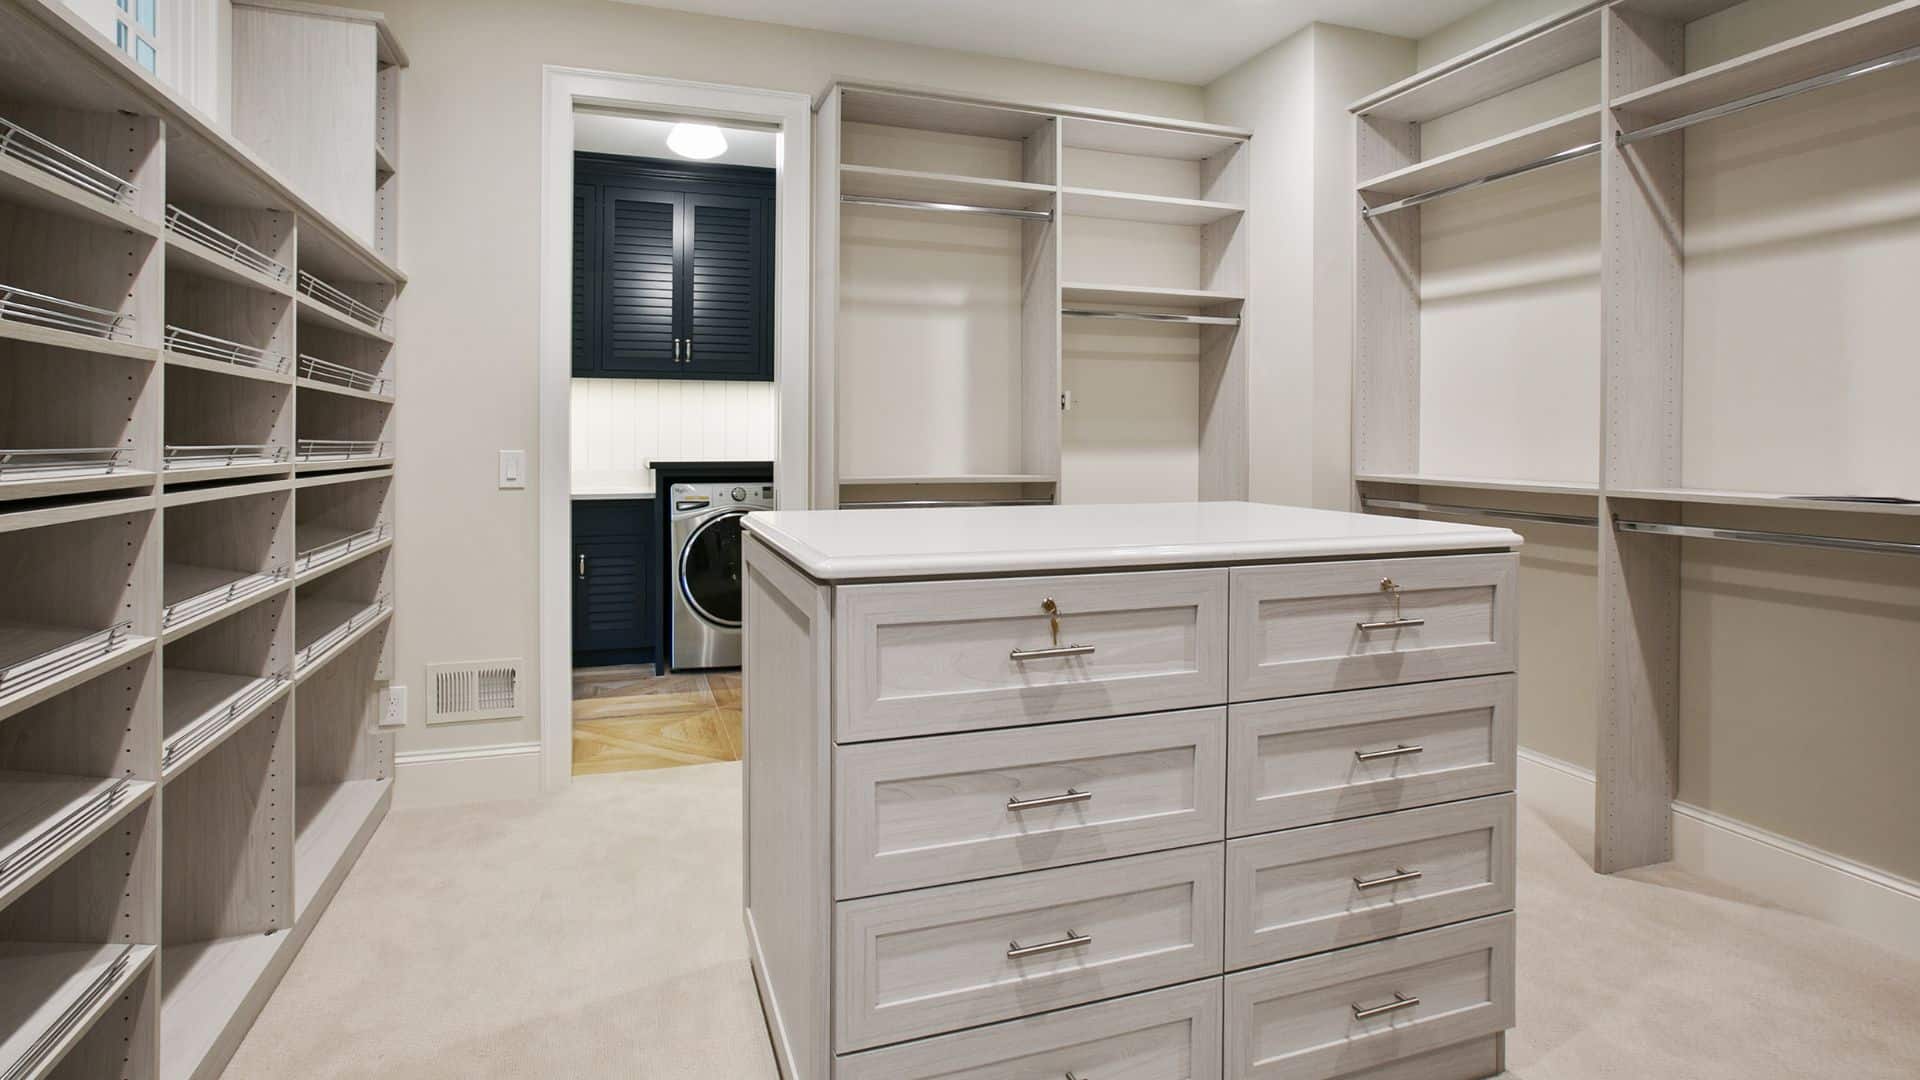 Custom closet design with center island with white countertop